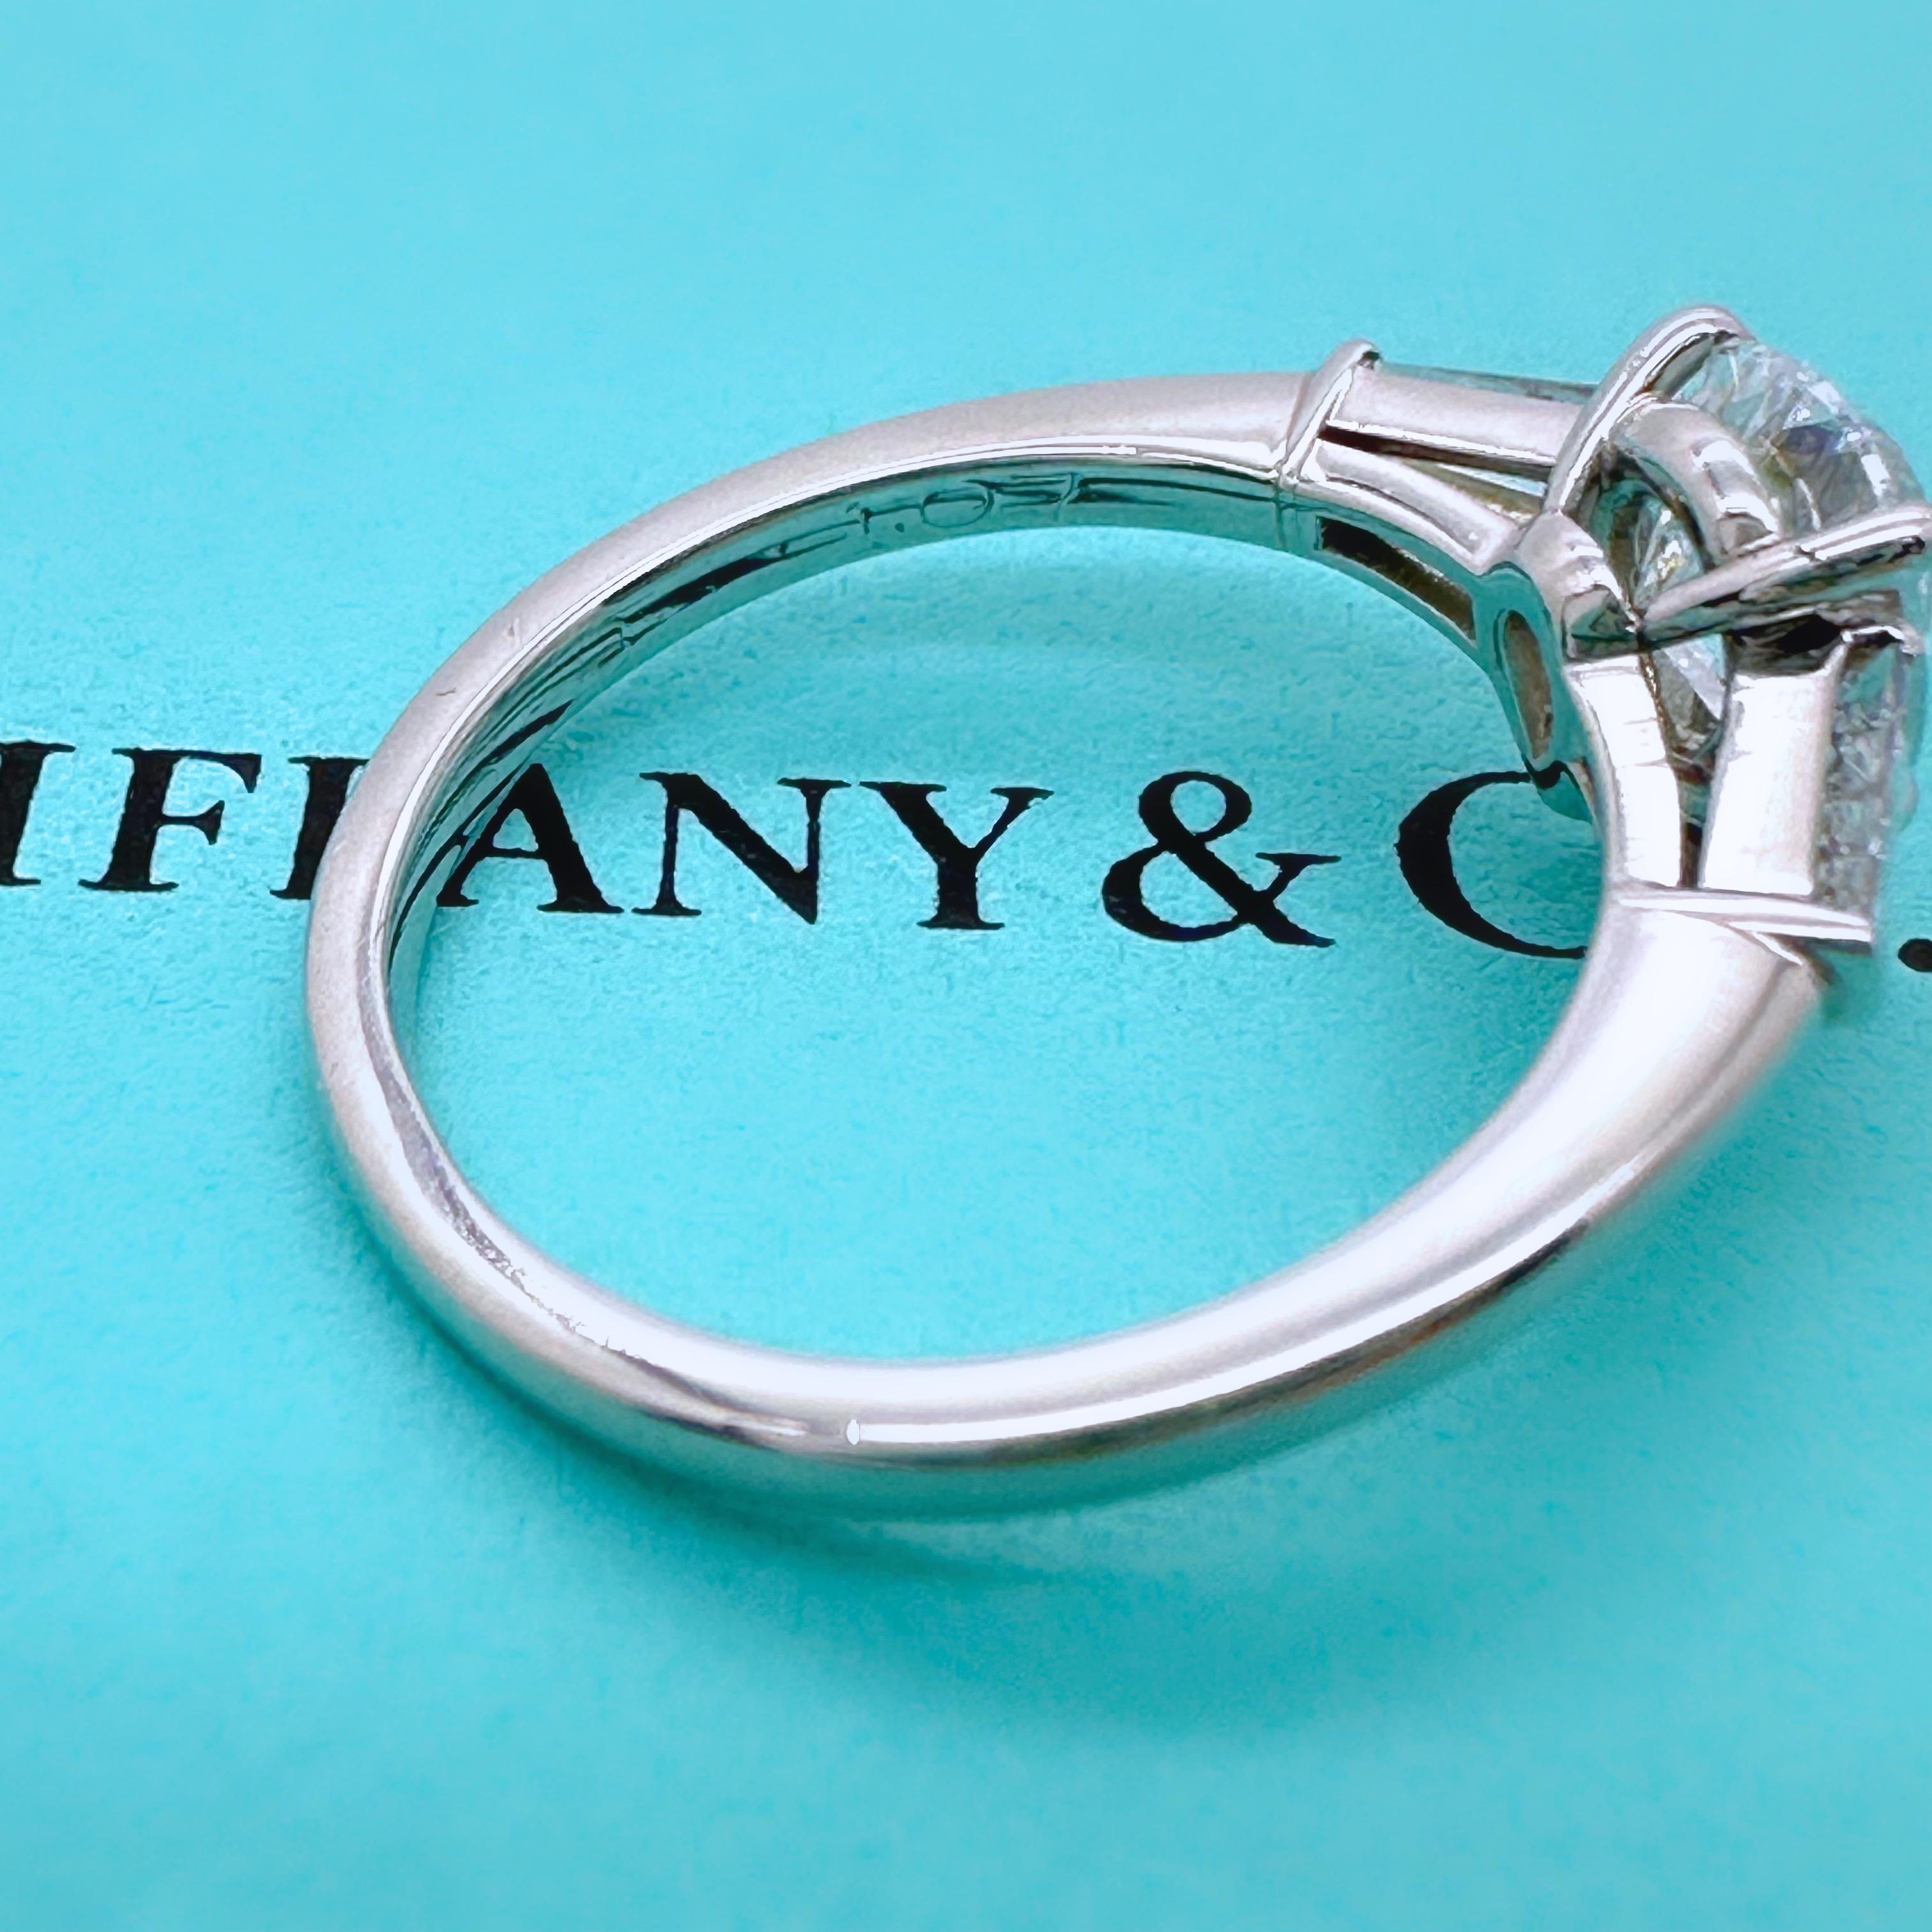 Tiffany & Co. Pear Diamond 1.07 D VS2 with Baguette Side Stones Engagement Ring For Sale 4